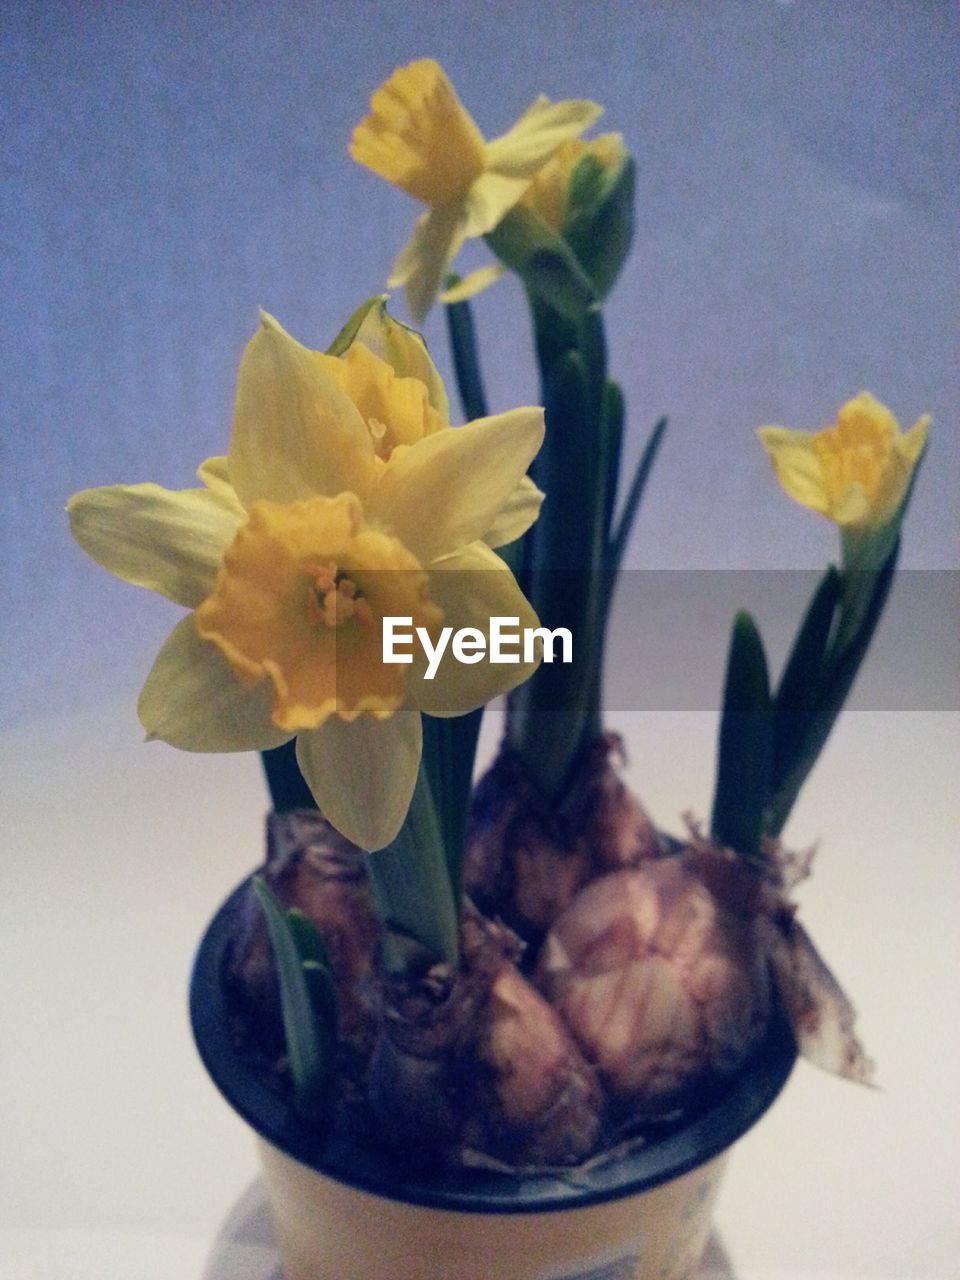 CLOSE-UP OF YELLOW DAFFODIL FLOWER VASE